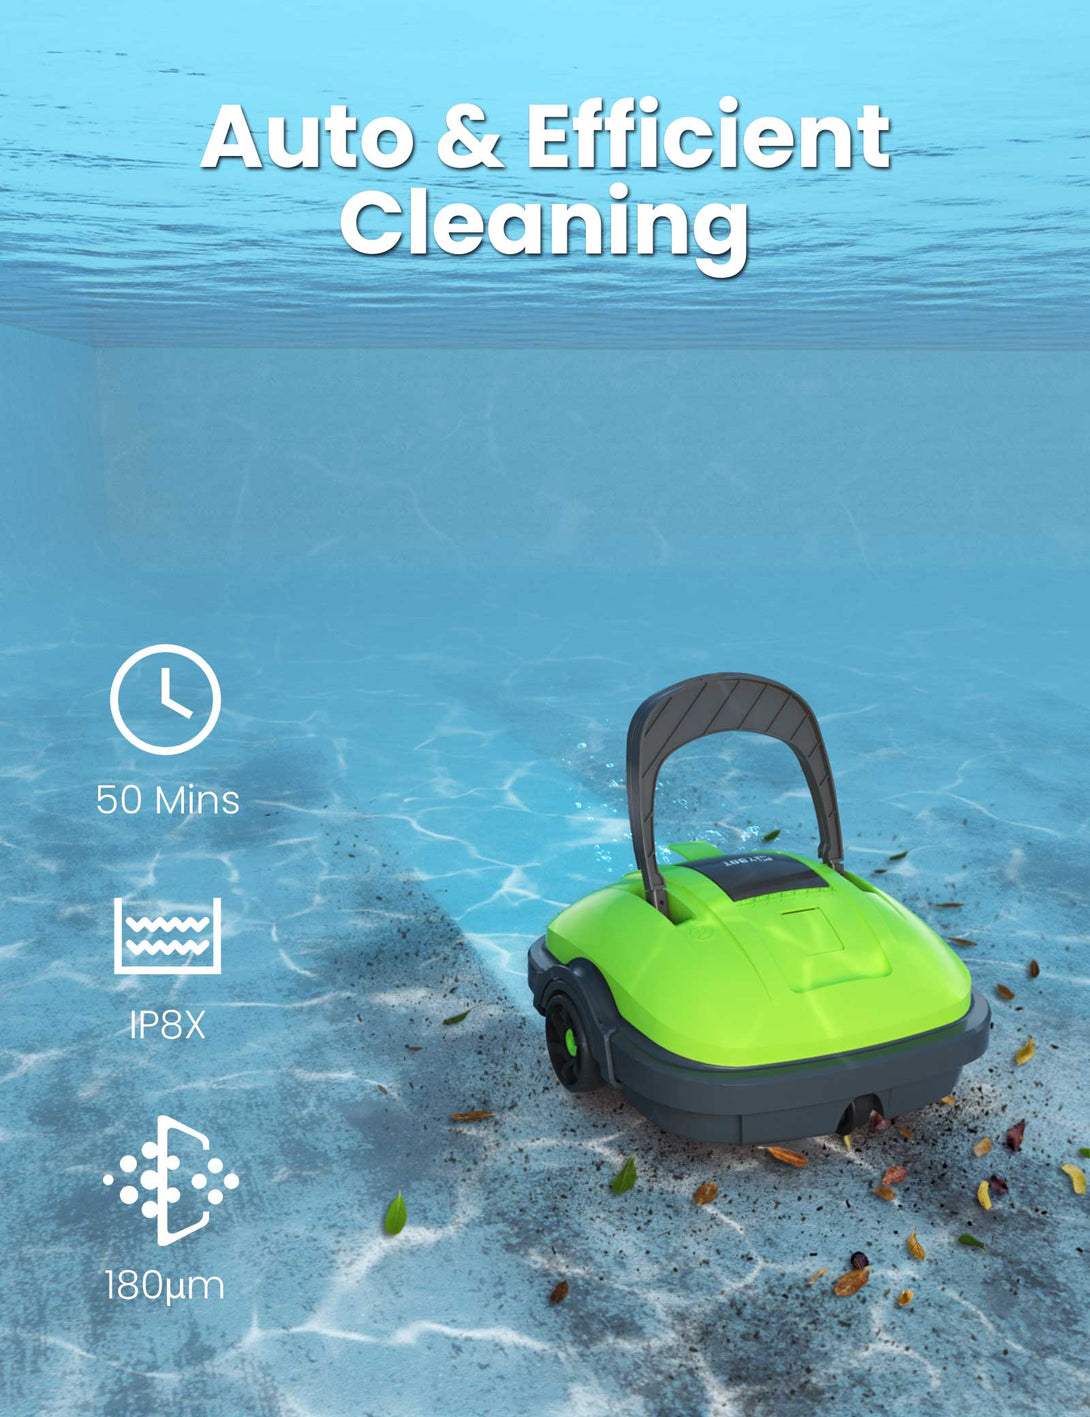 WYBOT Osprey 200 Green Auto Cleaning